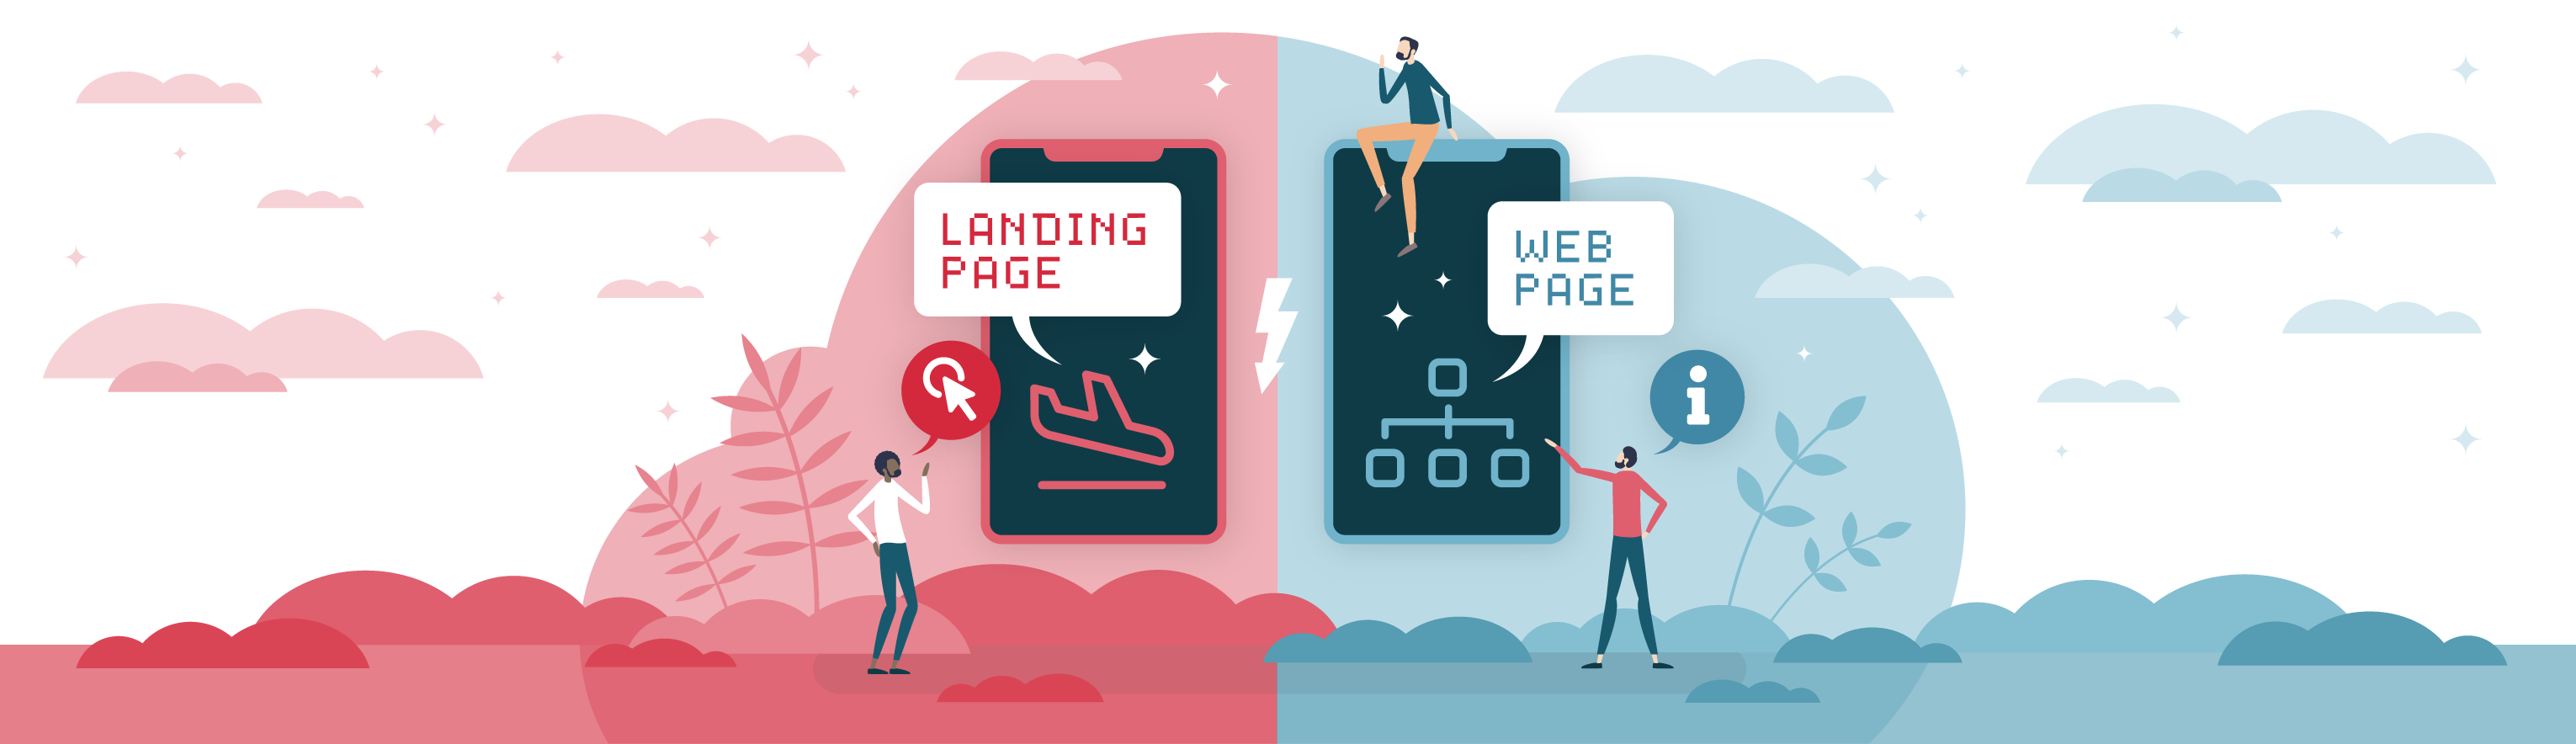 What Is the Difference Between a Landing Page and a Website Page?